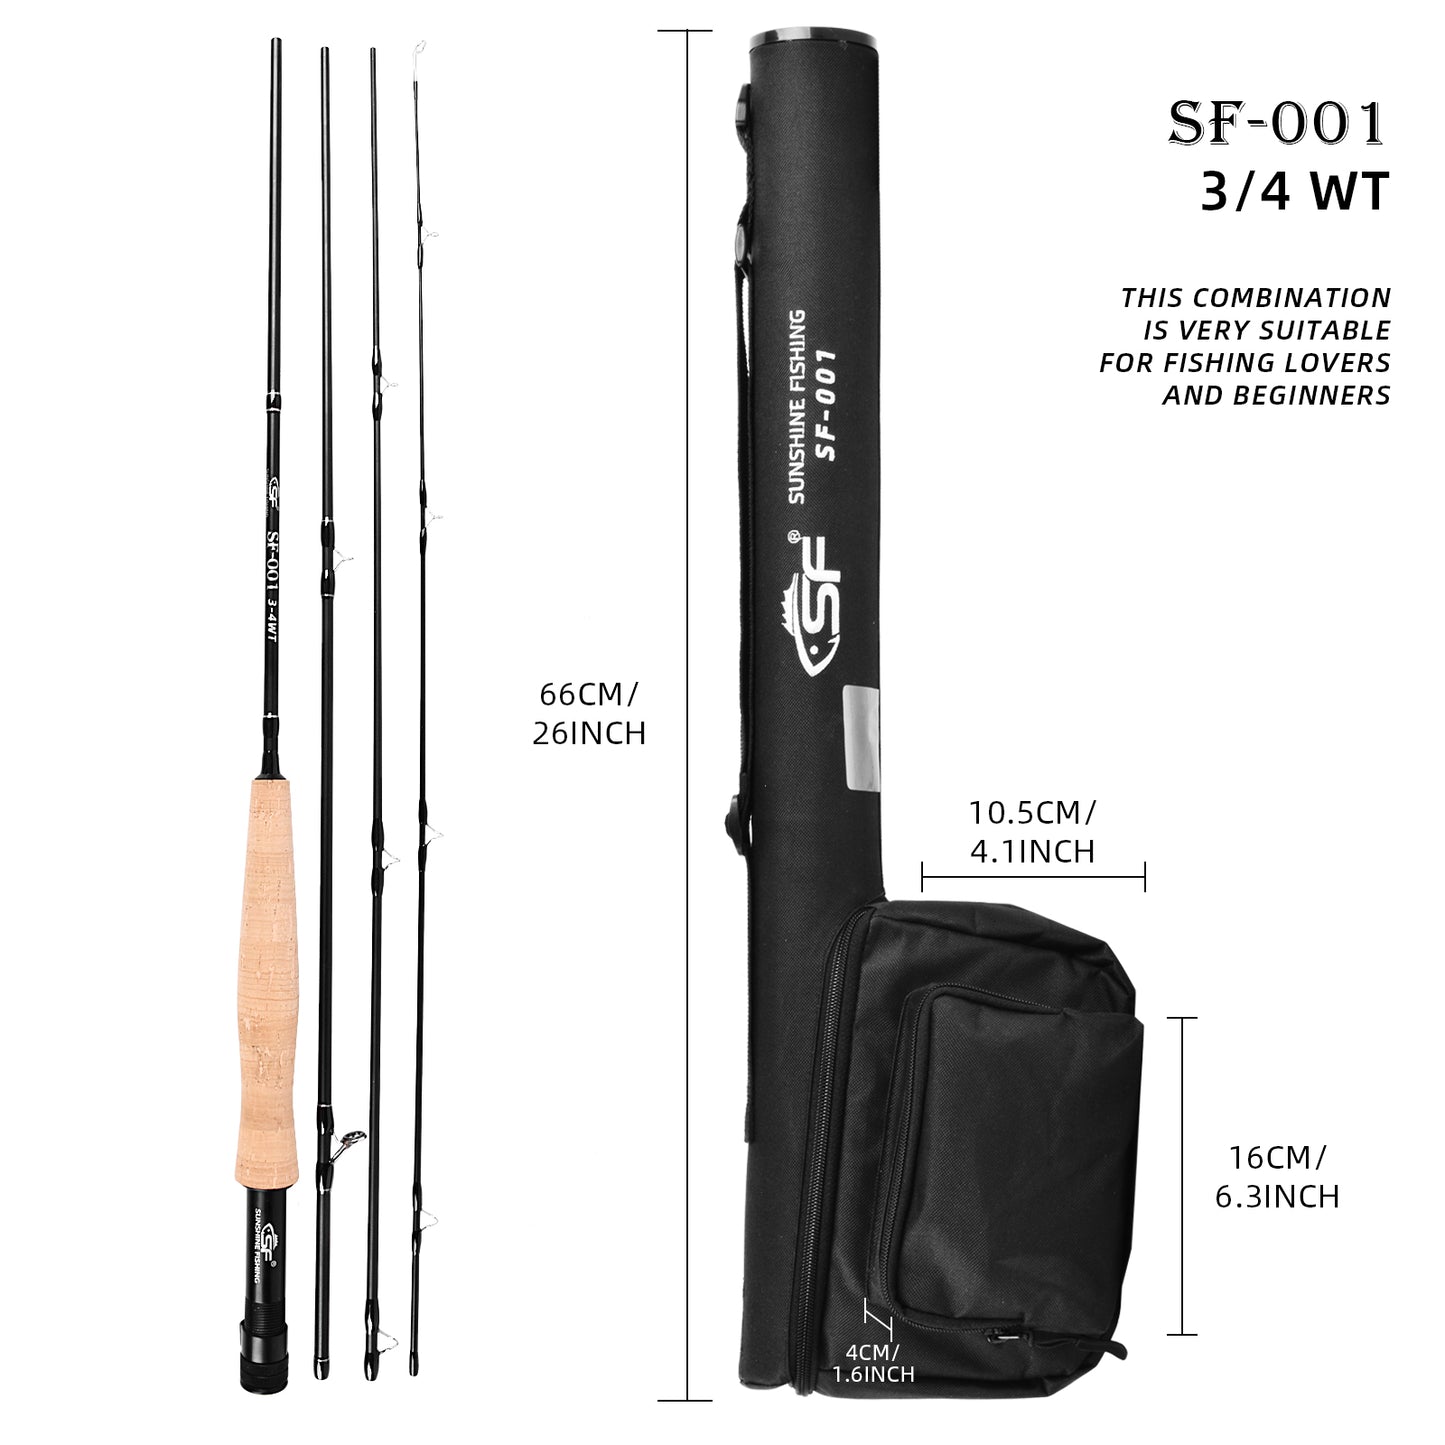 SF Fly Fishing Medium-Fast Action Rod Combo Kit 4 Piece 3/4wt 7.6FT for New and Younger Anglers